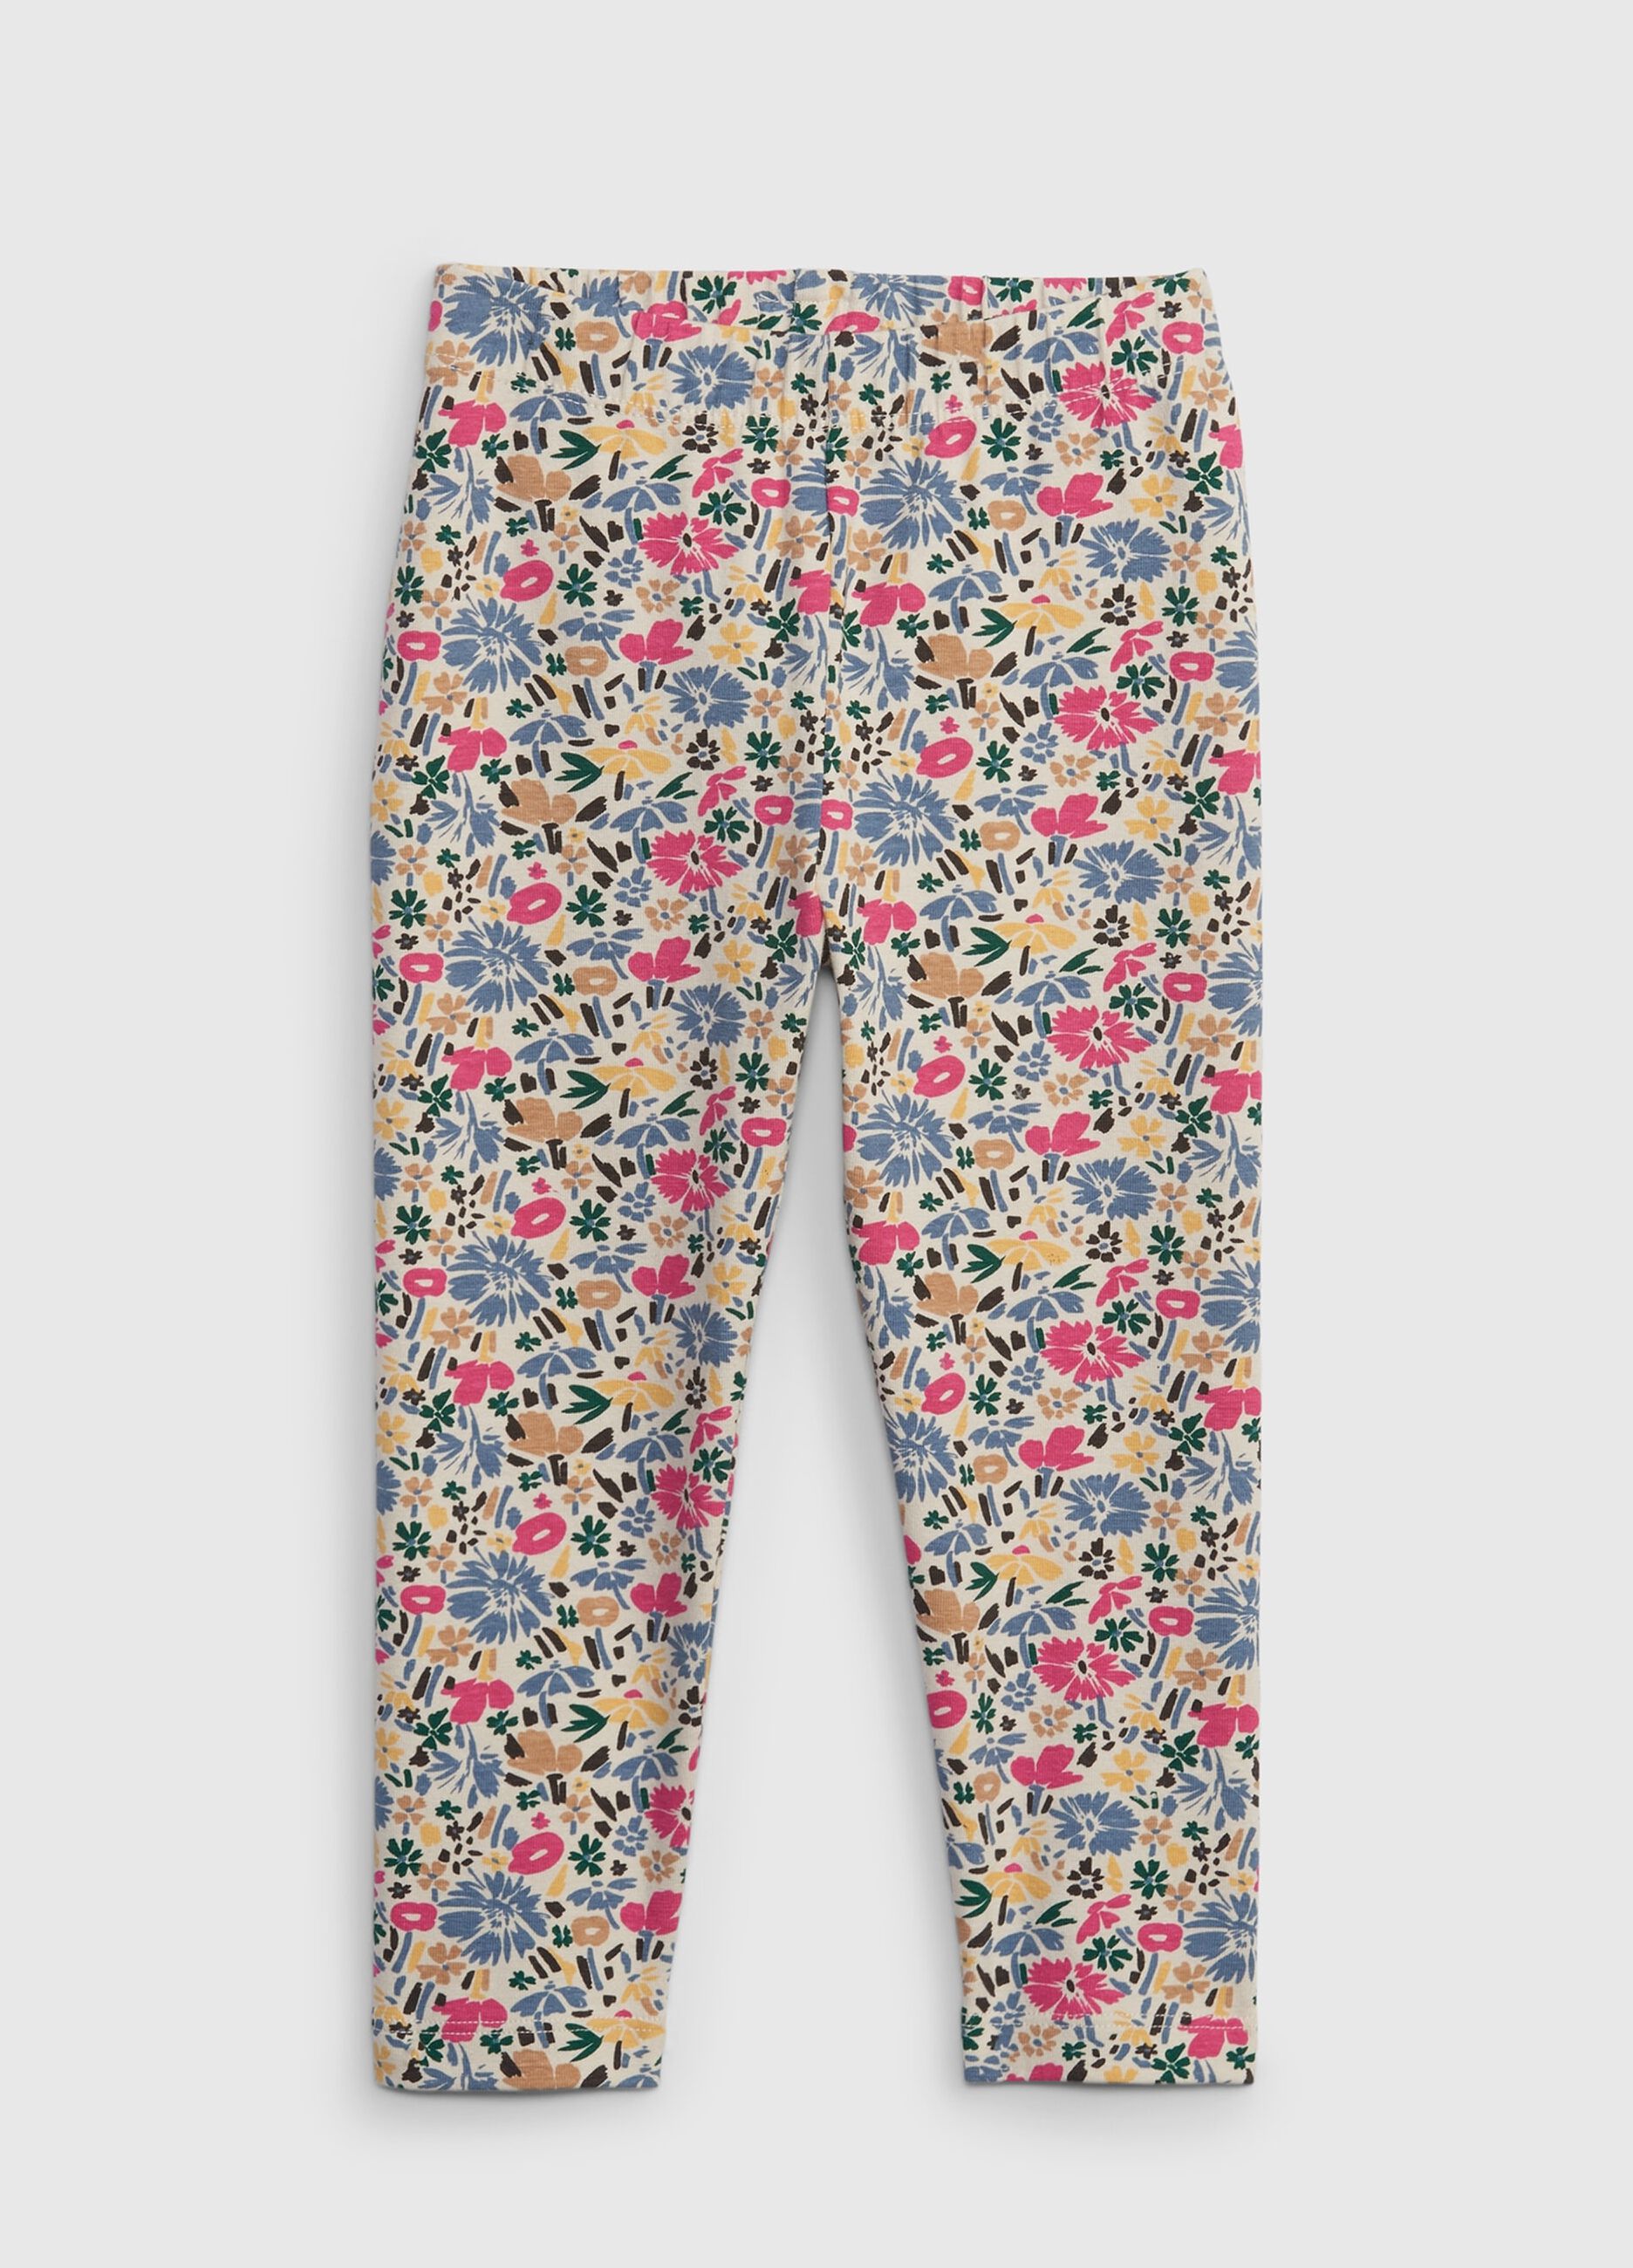 Stretch cotton leggings with floral print